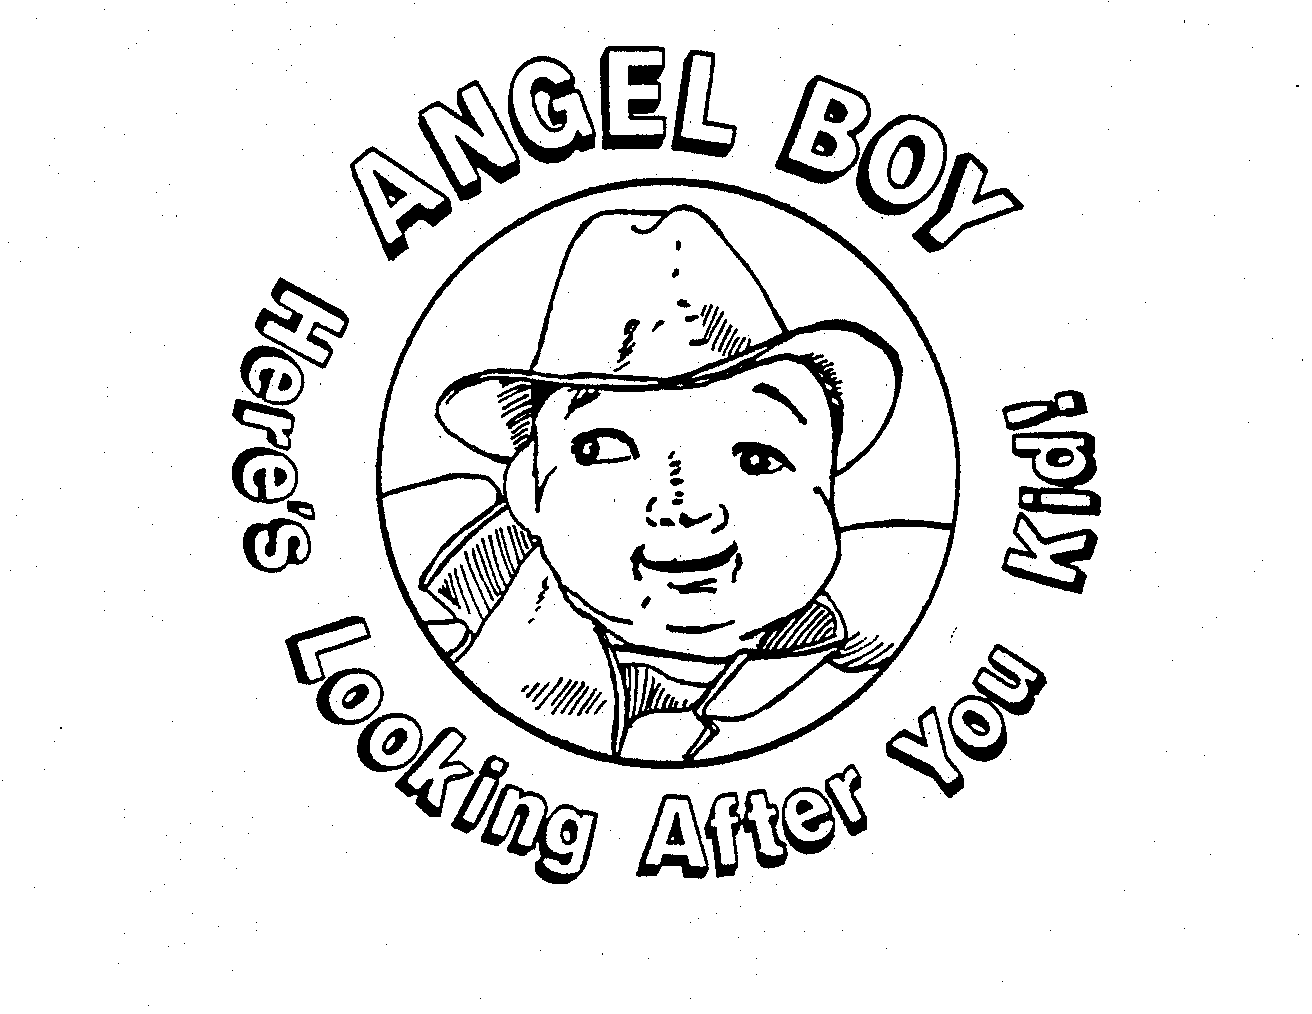 Trademark Logo ANGEL BOY HERE'S LOOKING AFTER YOU KID!